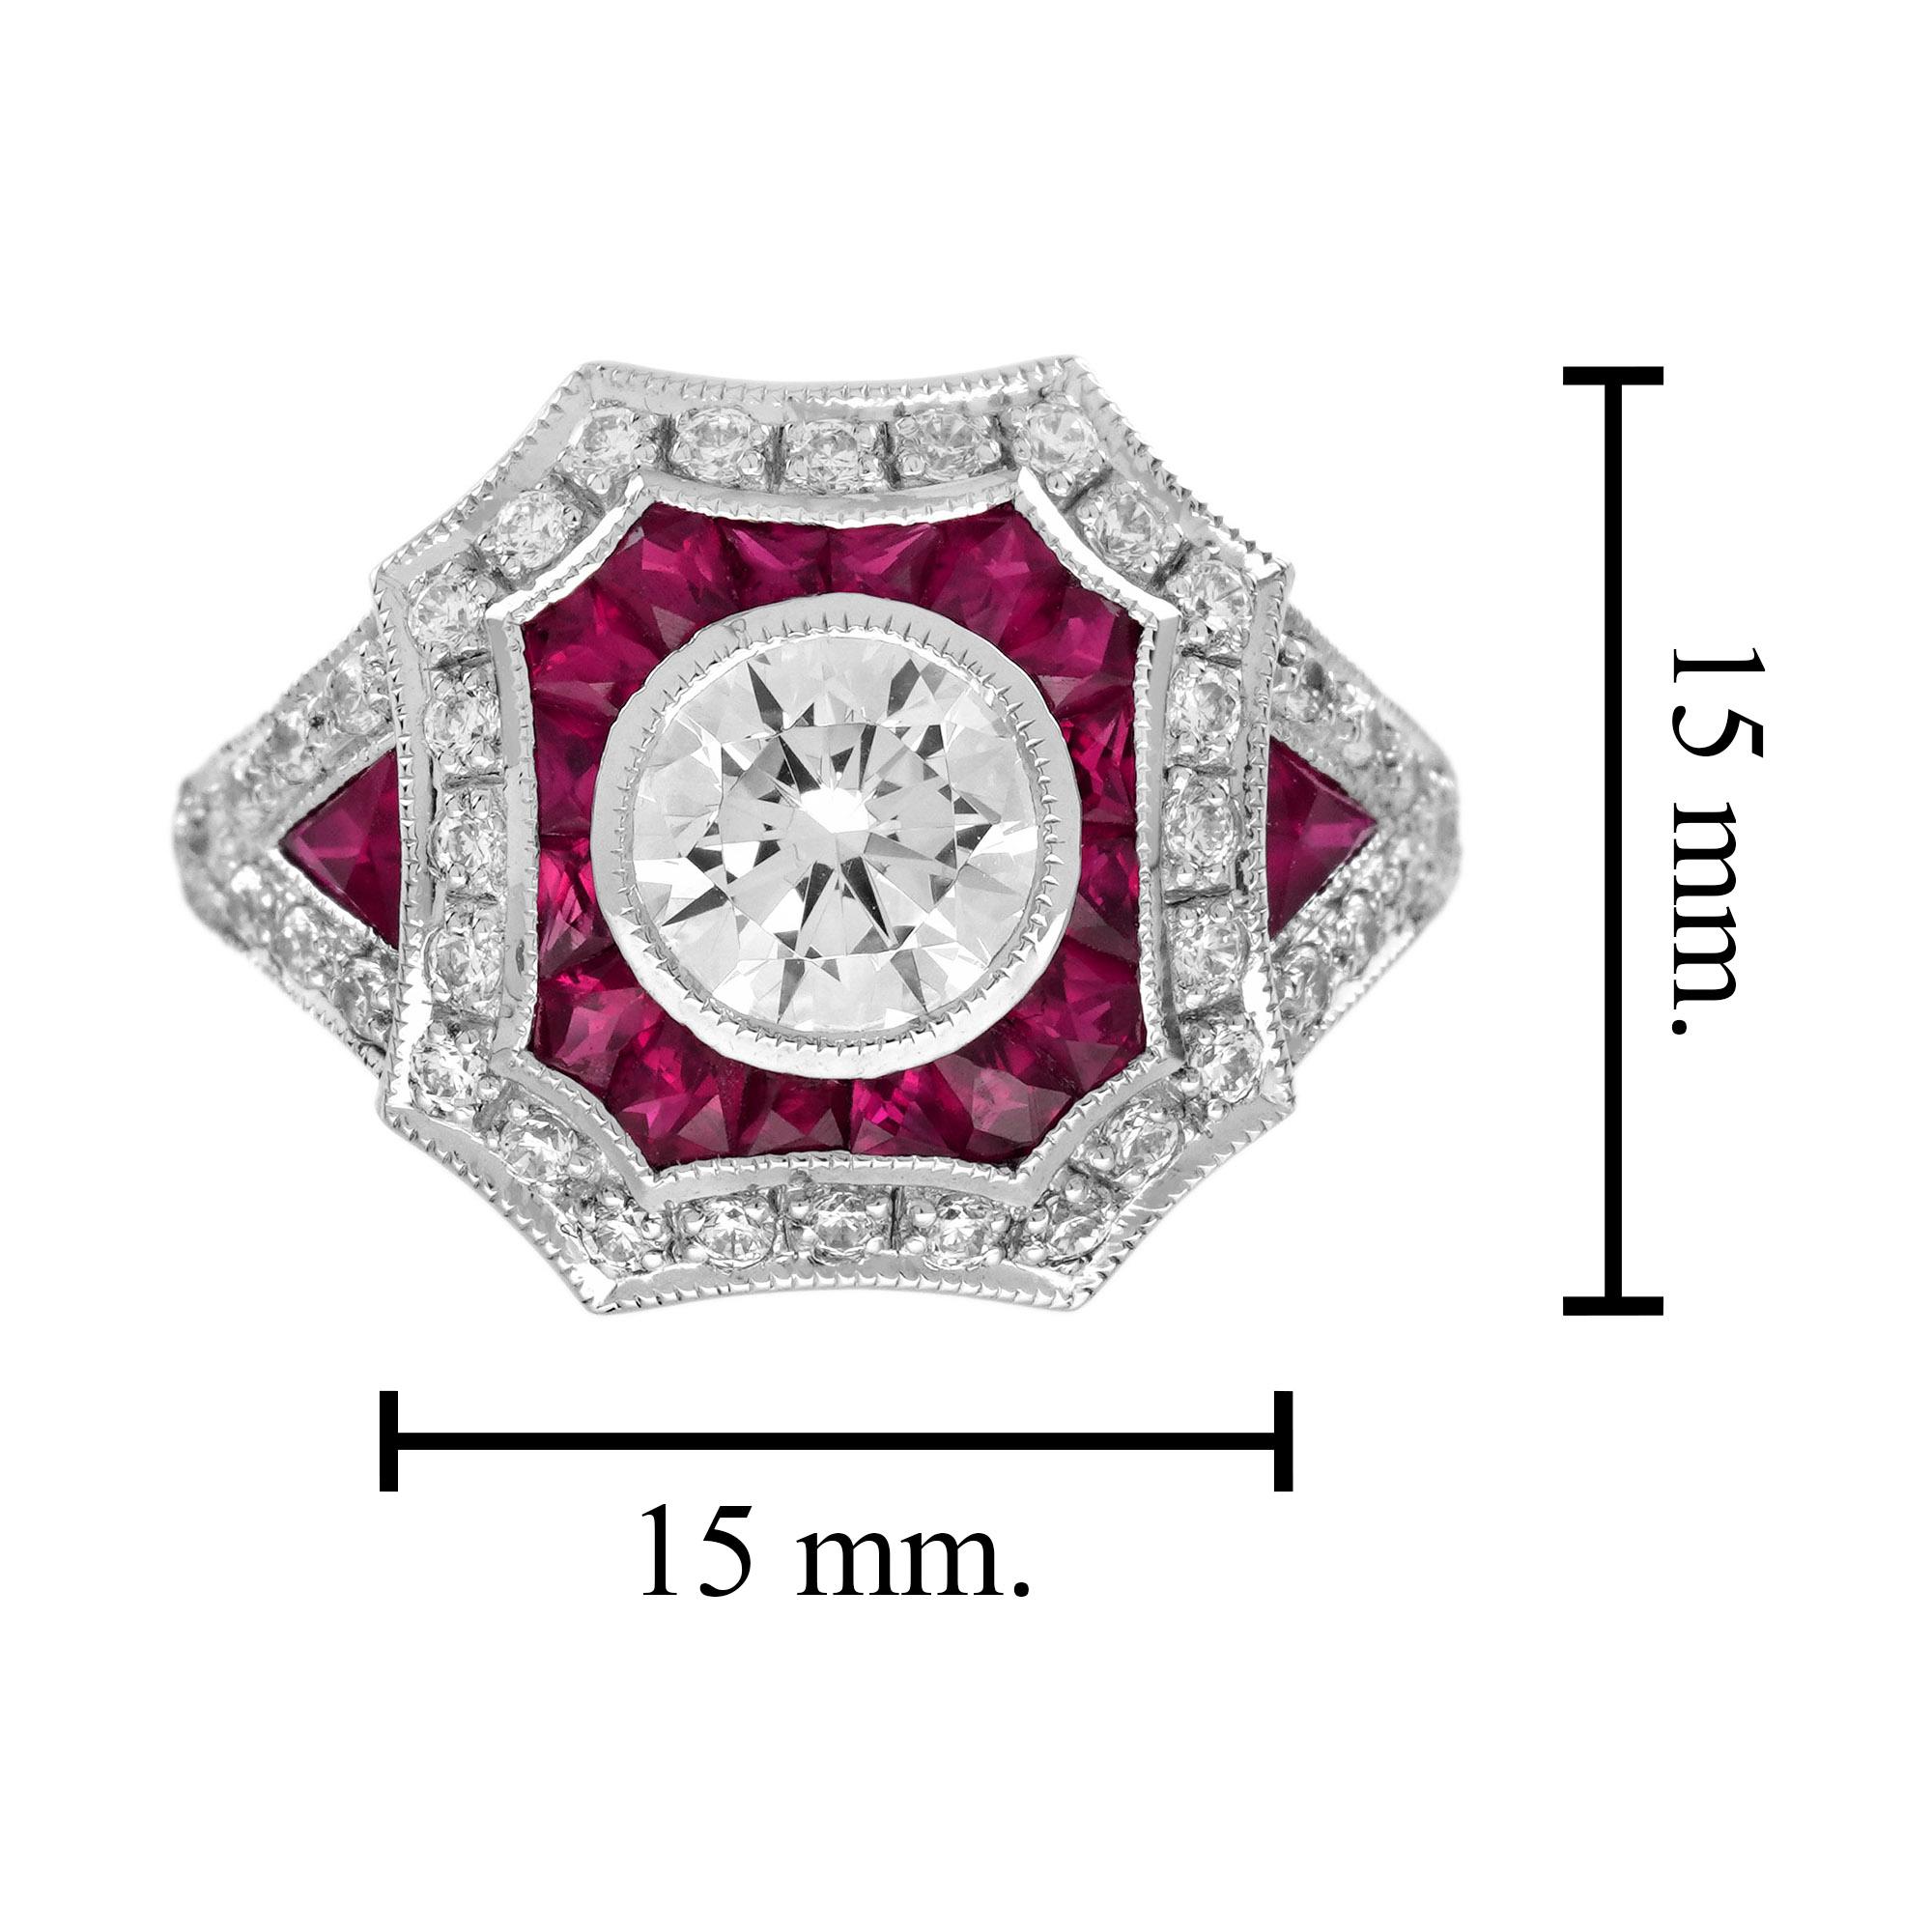 1 Ct. Diamond and Ruby Art Deco Style Engagement Ring in 18K White Gold For Sale 2